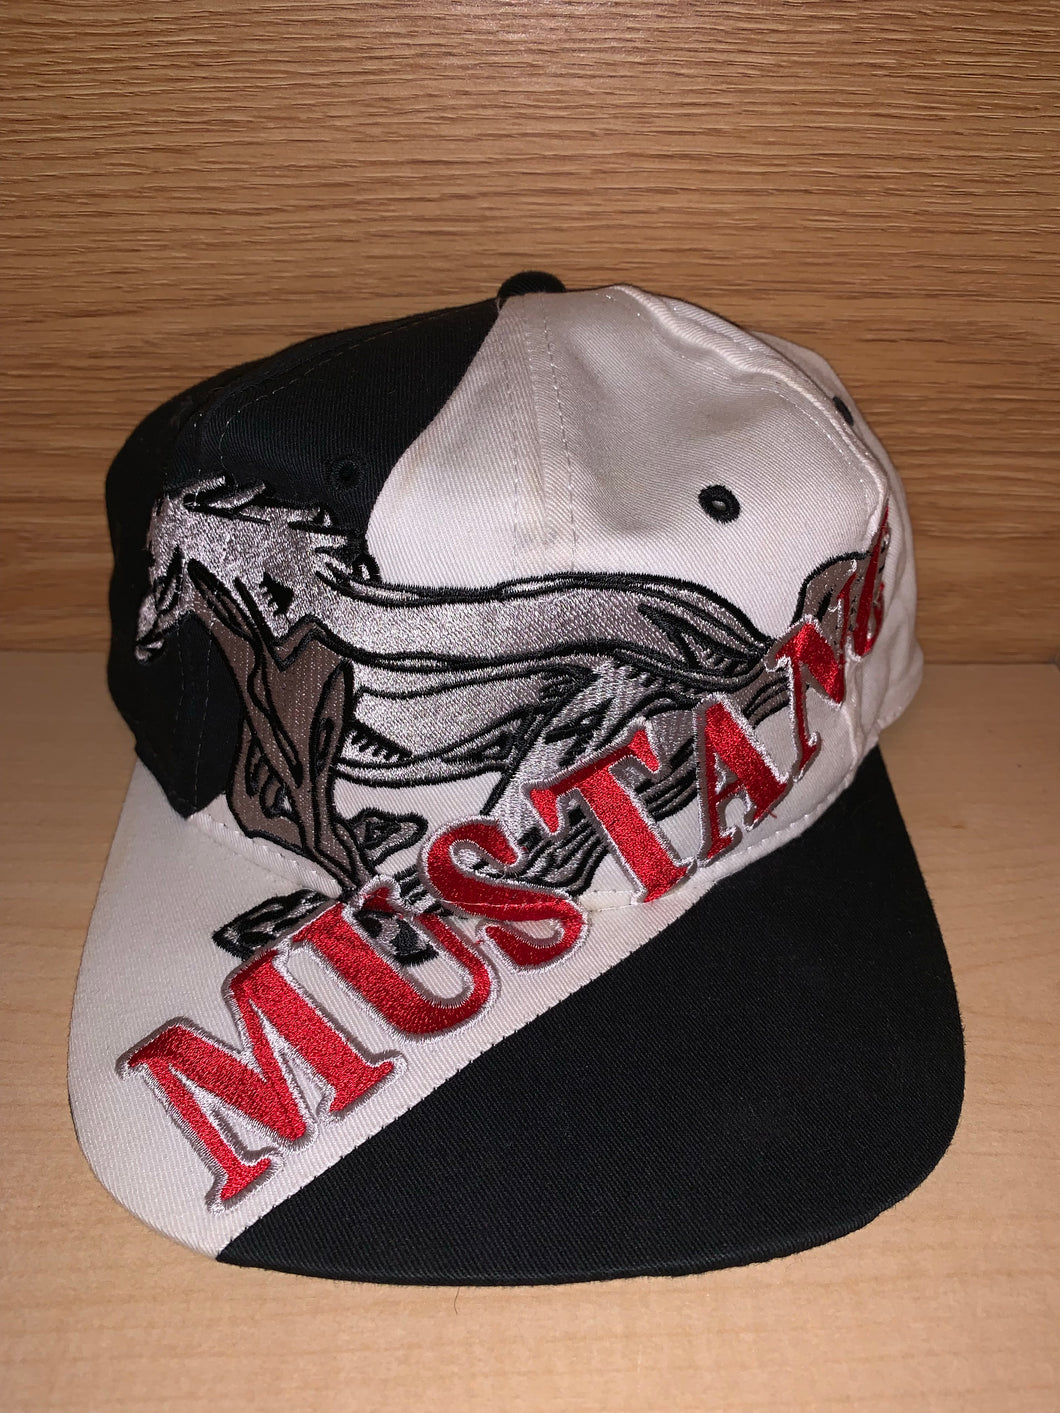 Vintage Ford Mustang Hat